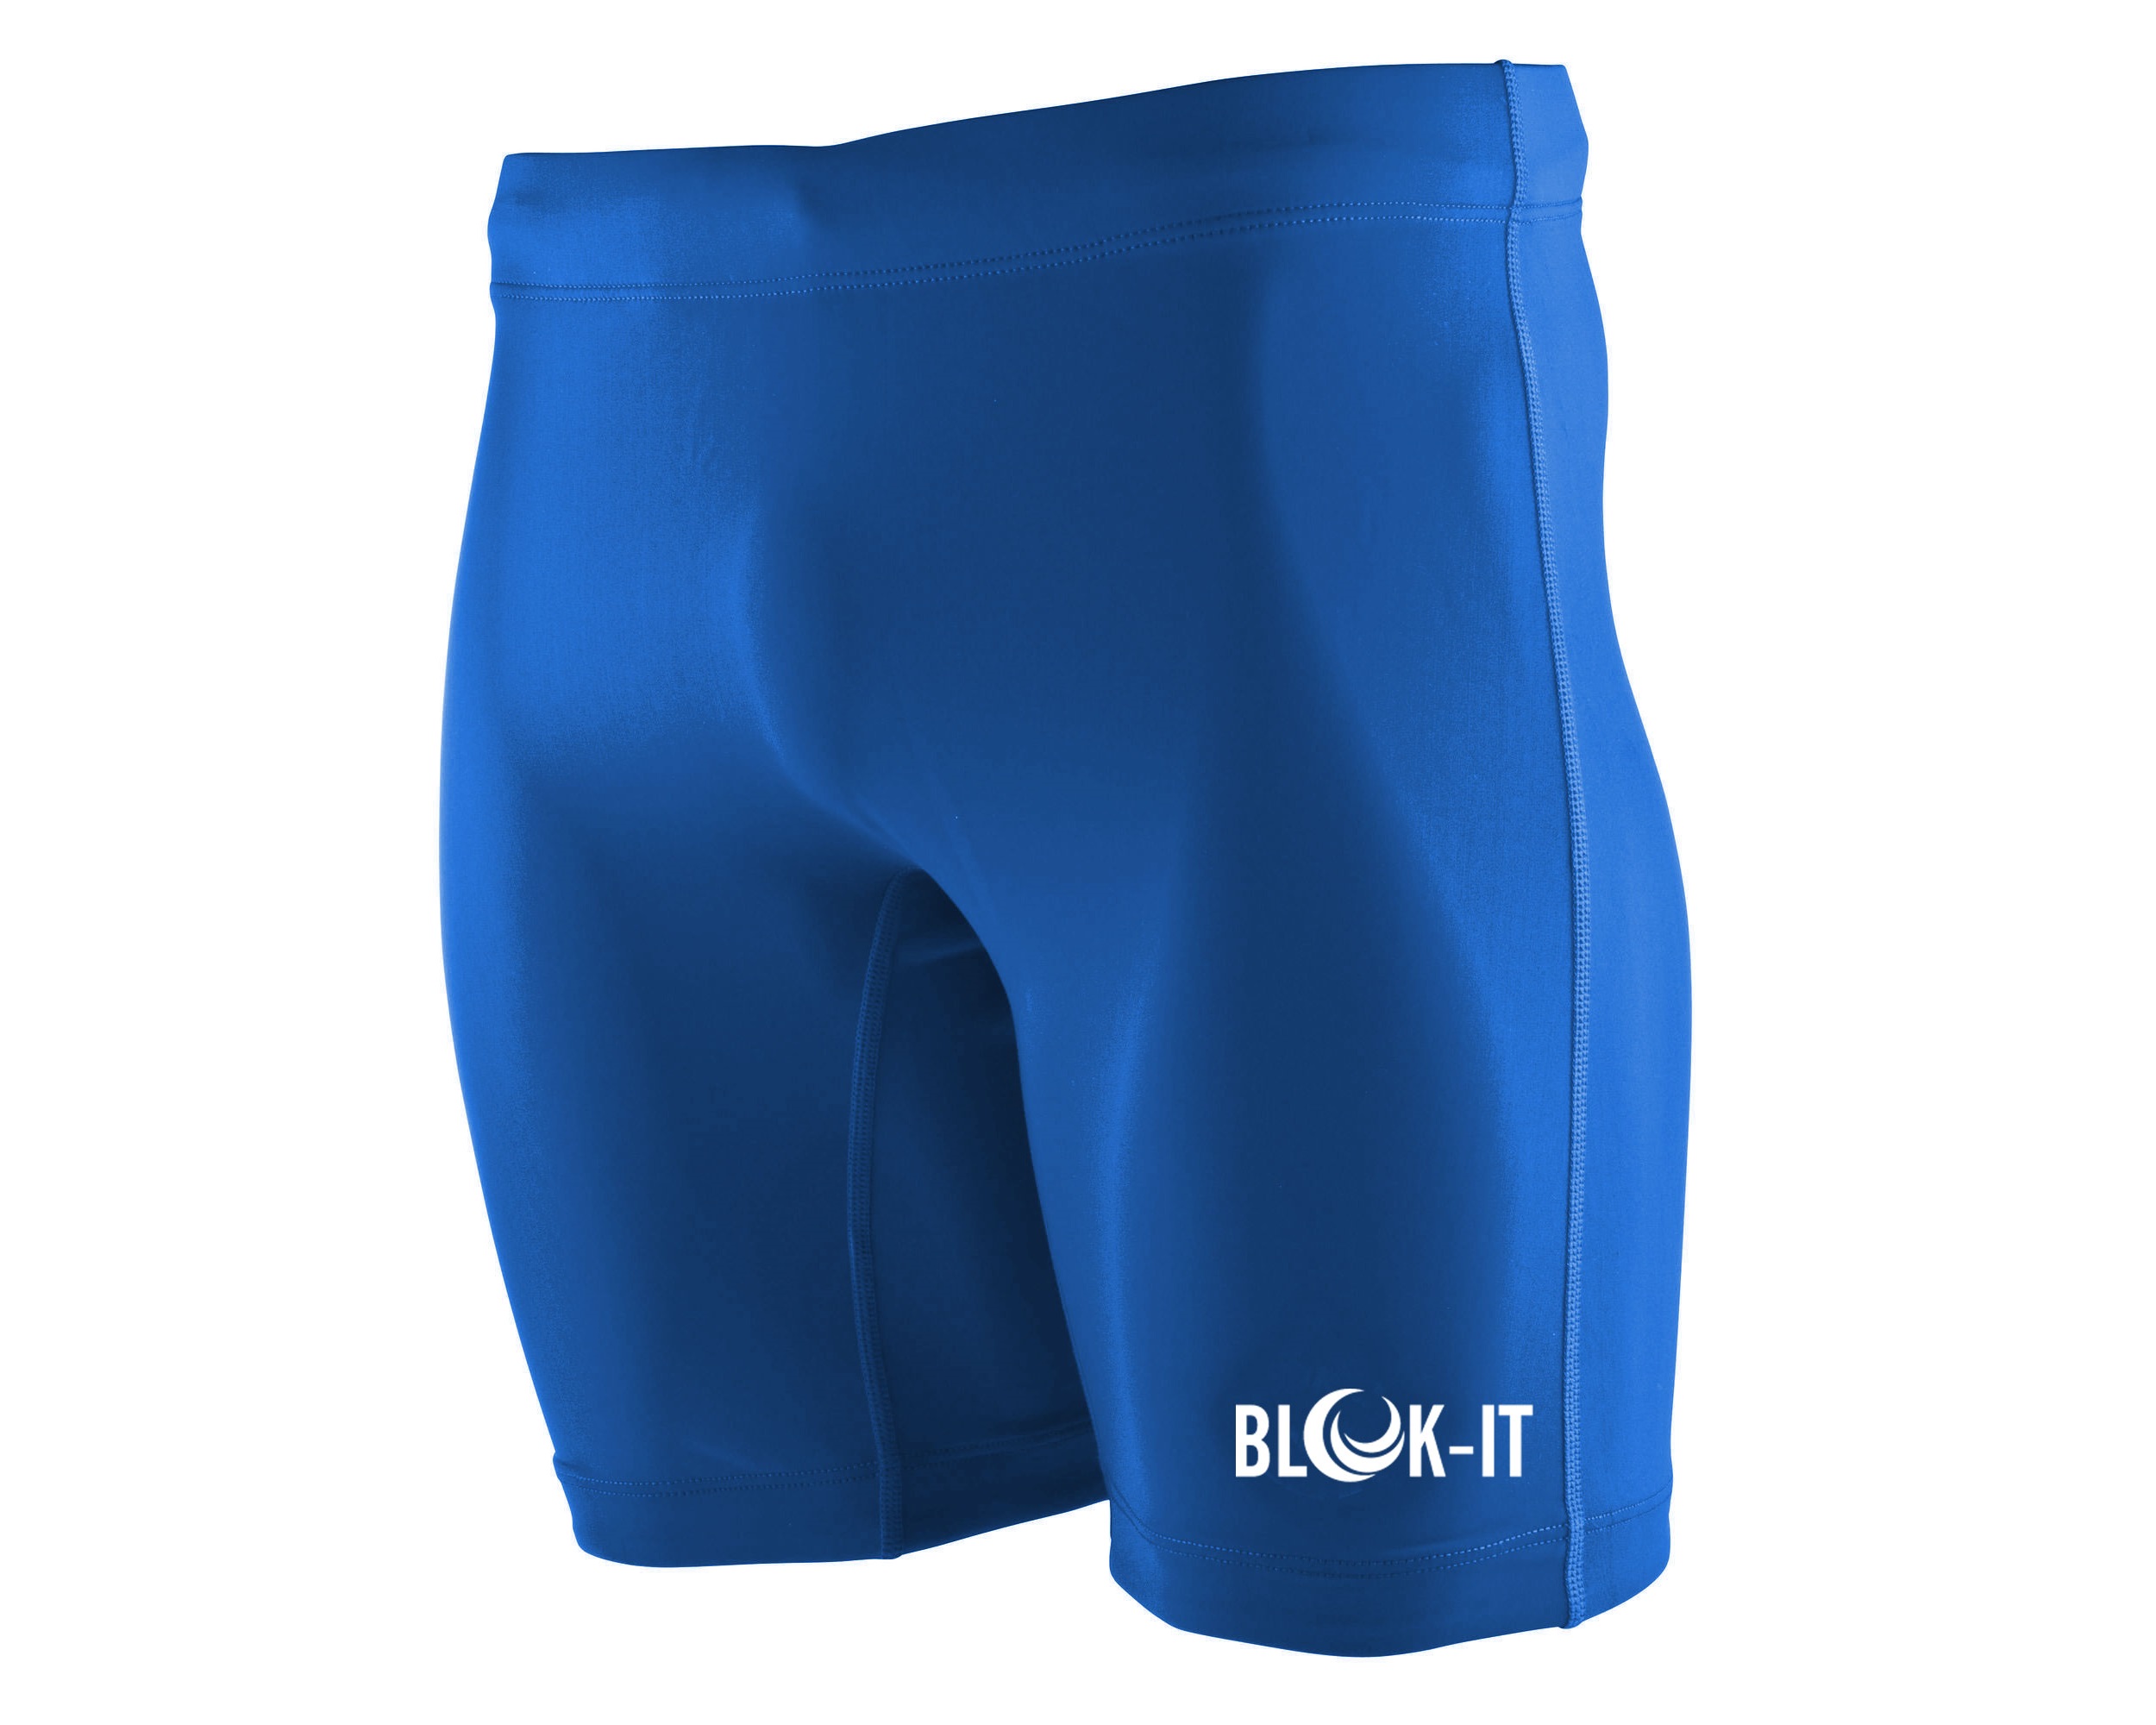 Blok-iT Compression Shorts. Suitable for Running, Cycling, Gym ...